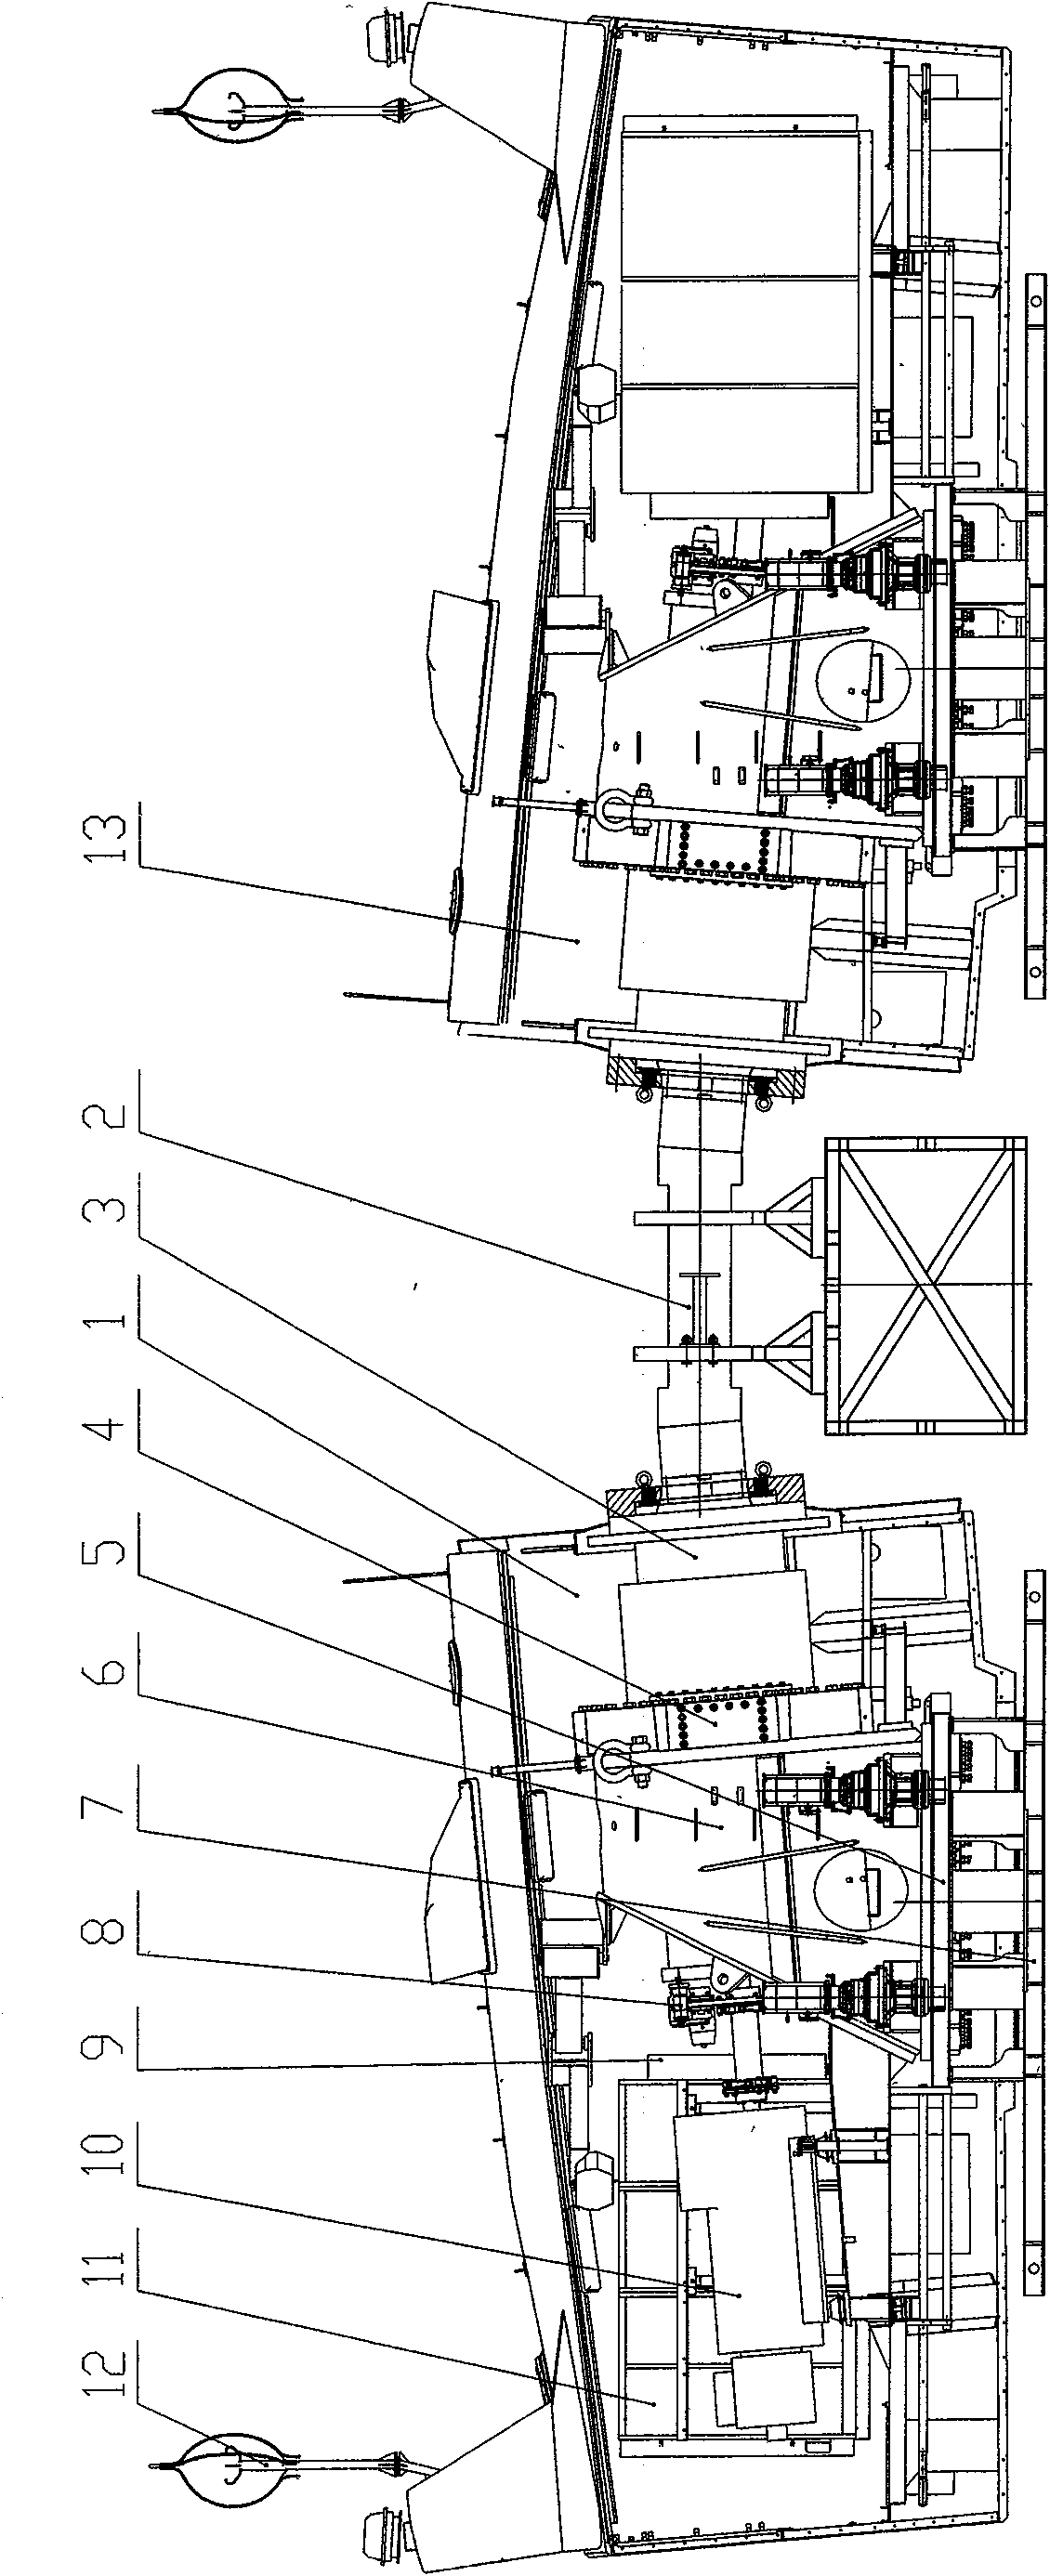 Full power test method and test device for whole wind turbine